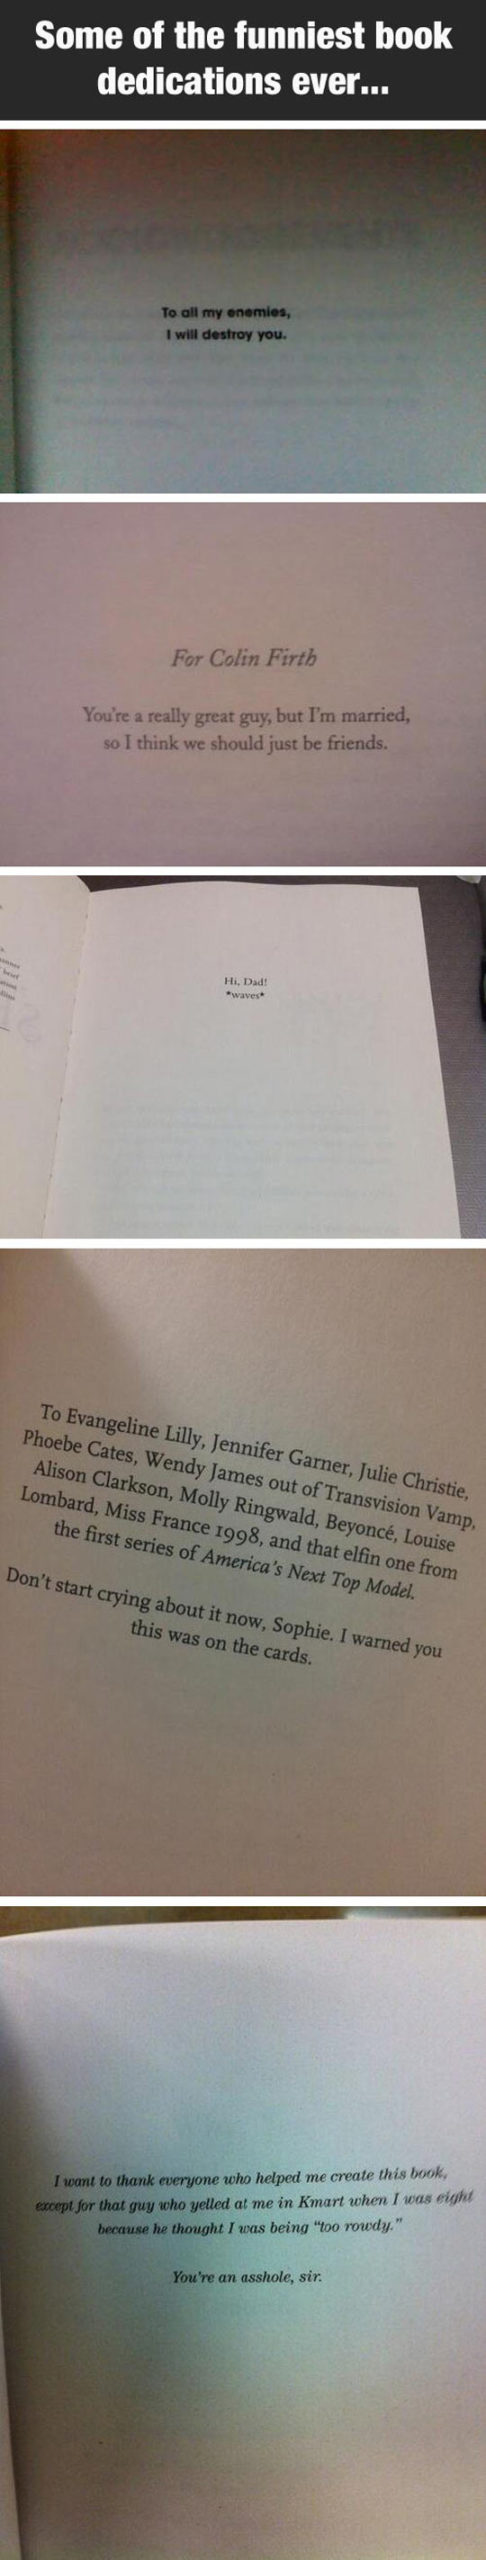 Some+Of+The+Best+Book+Dedications+Ever